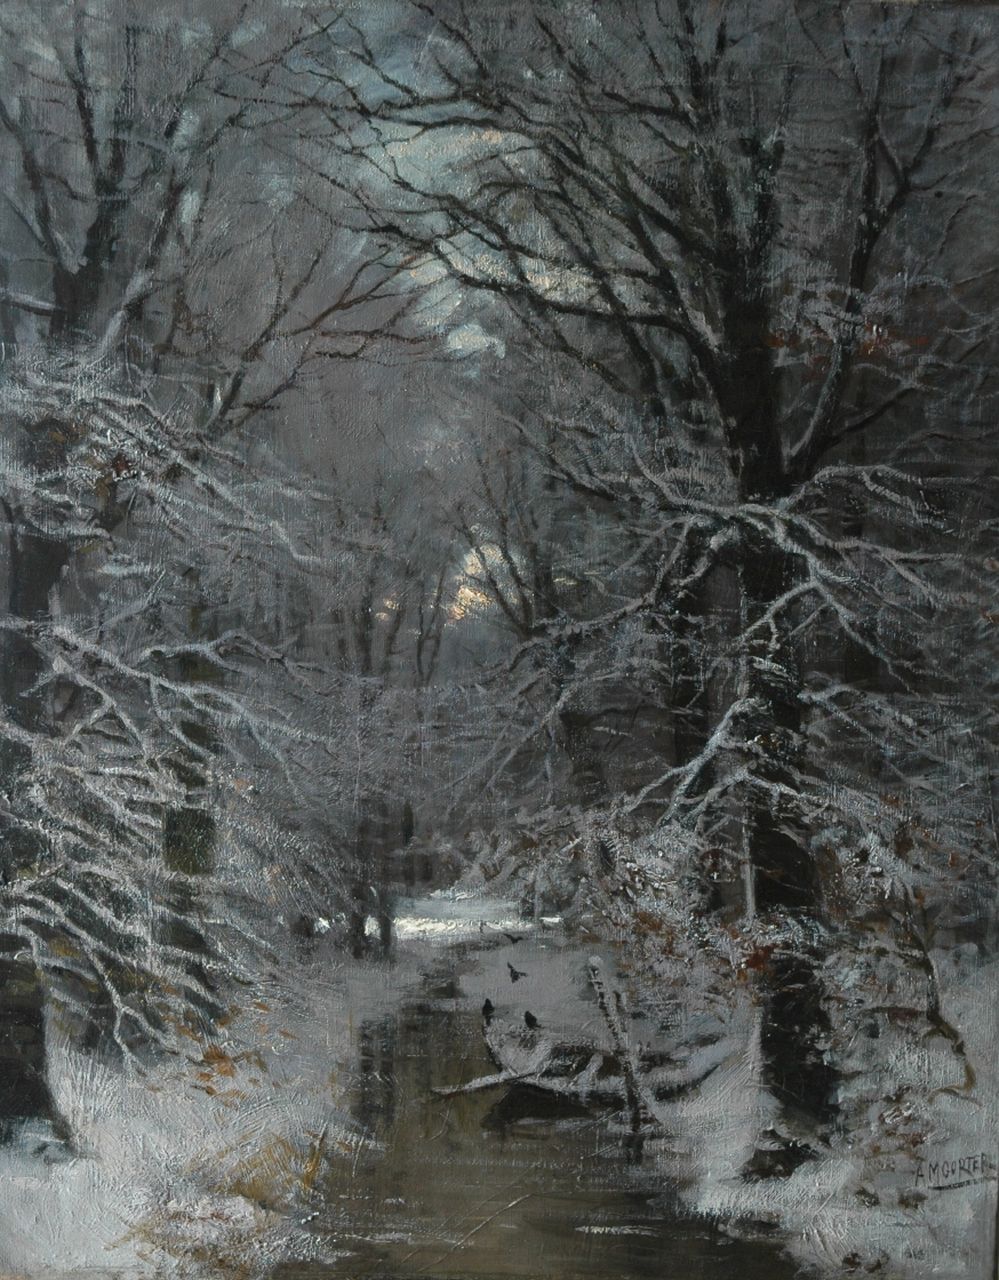 Gorter A.M.  | 'Arnold' Marc Gorter, Forest stream in the snow, oil on canvas 76.2 x 60.3 cm, signed l.r.